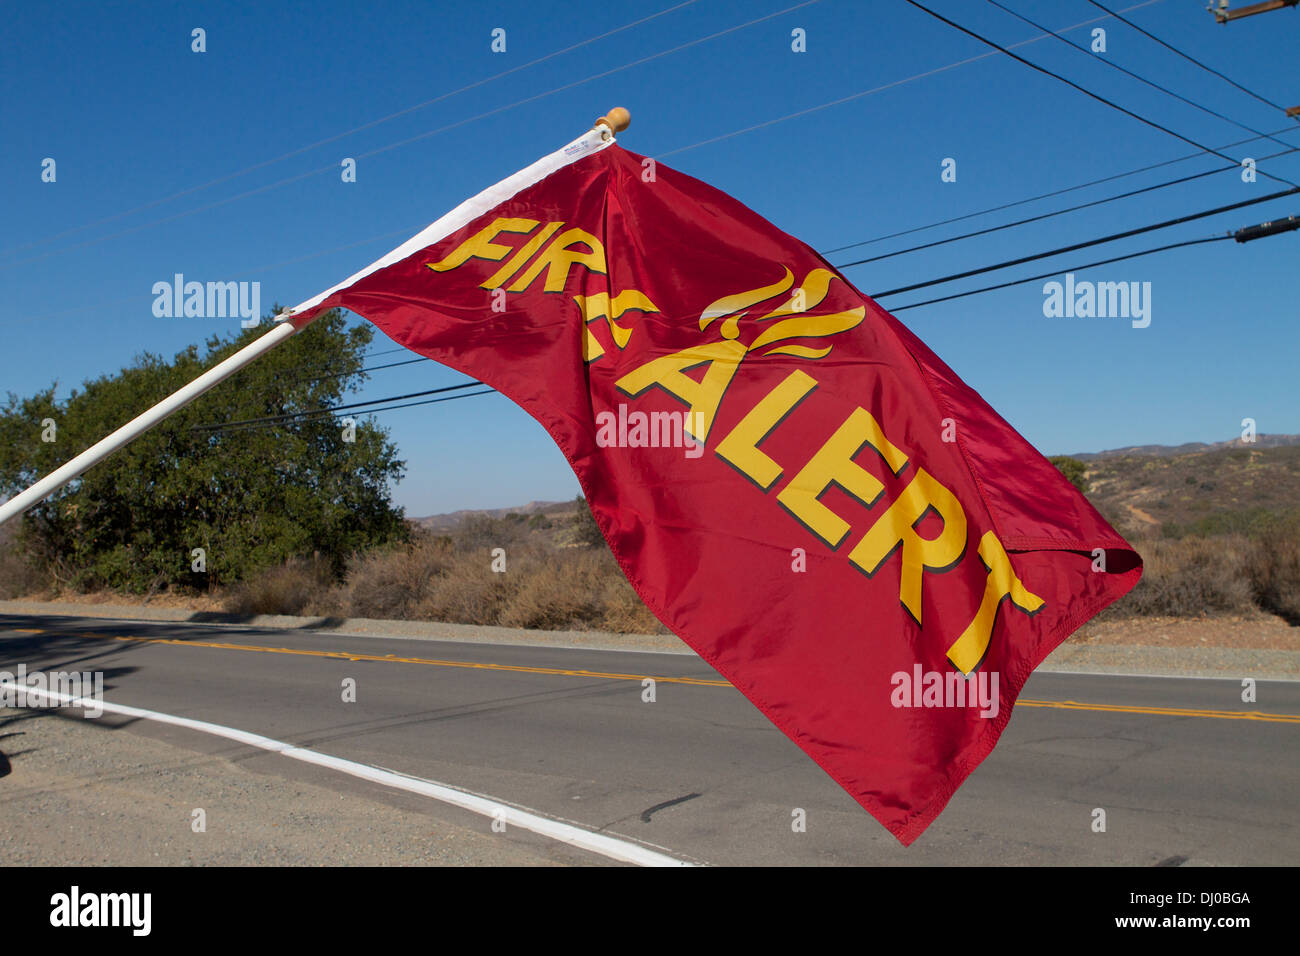 High wind Fire alert red flag warning sign in Southern California ; USA Stock Photo